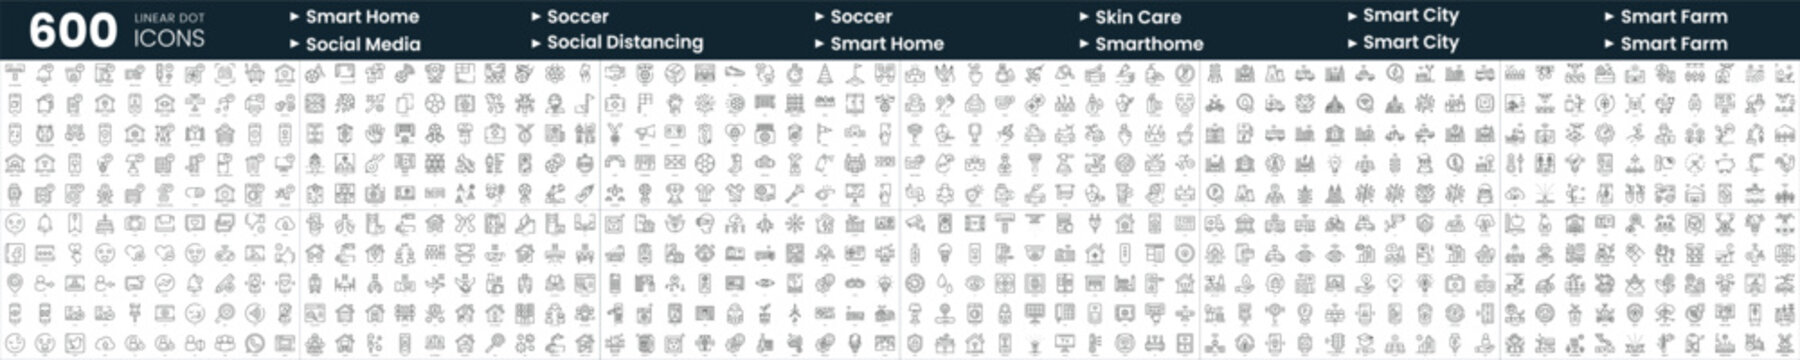 Set of 600 thin line icons. In this bundle include skin care, smart farm, smart home, social media and more